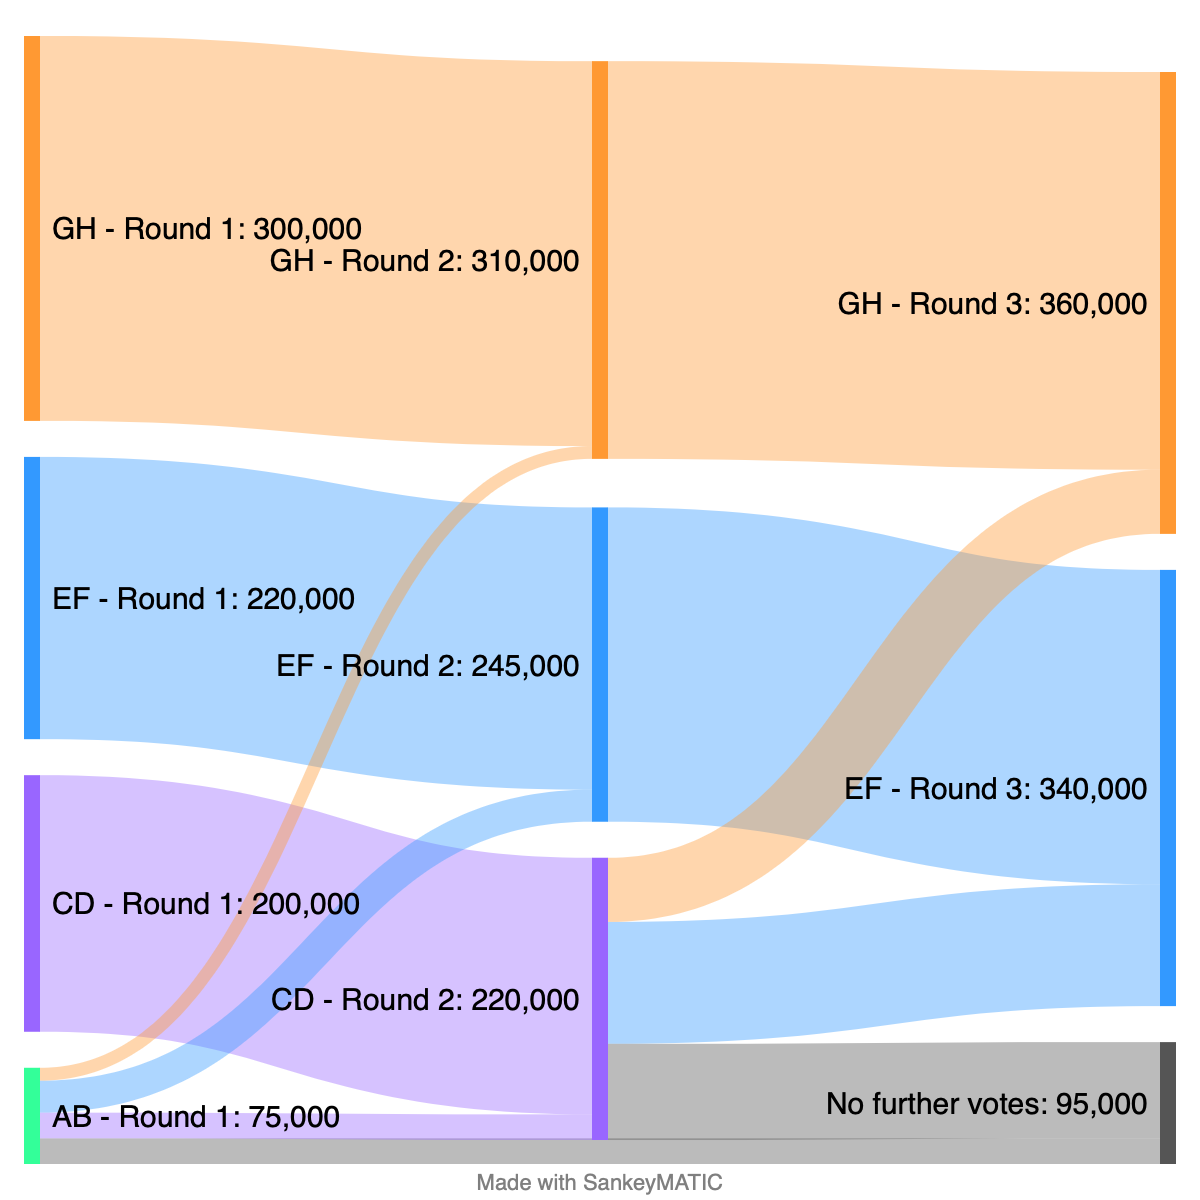 Thumbnail image of the sample Sankey diagram for a Ranked Election